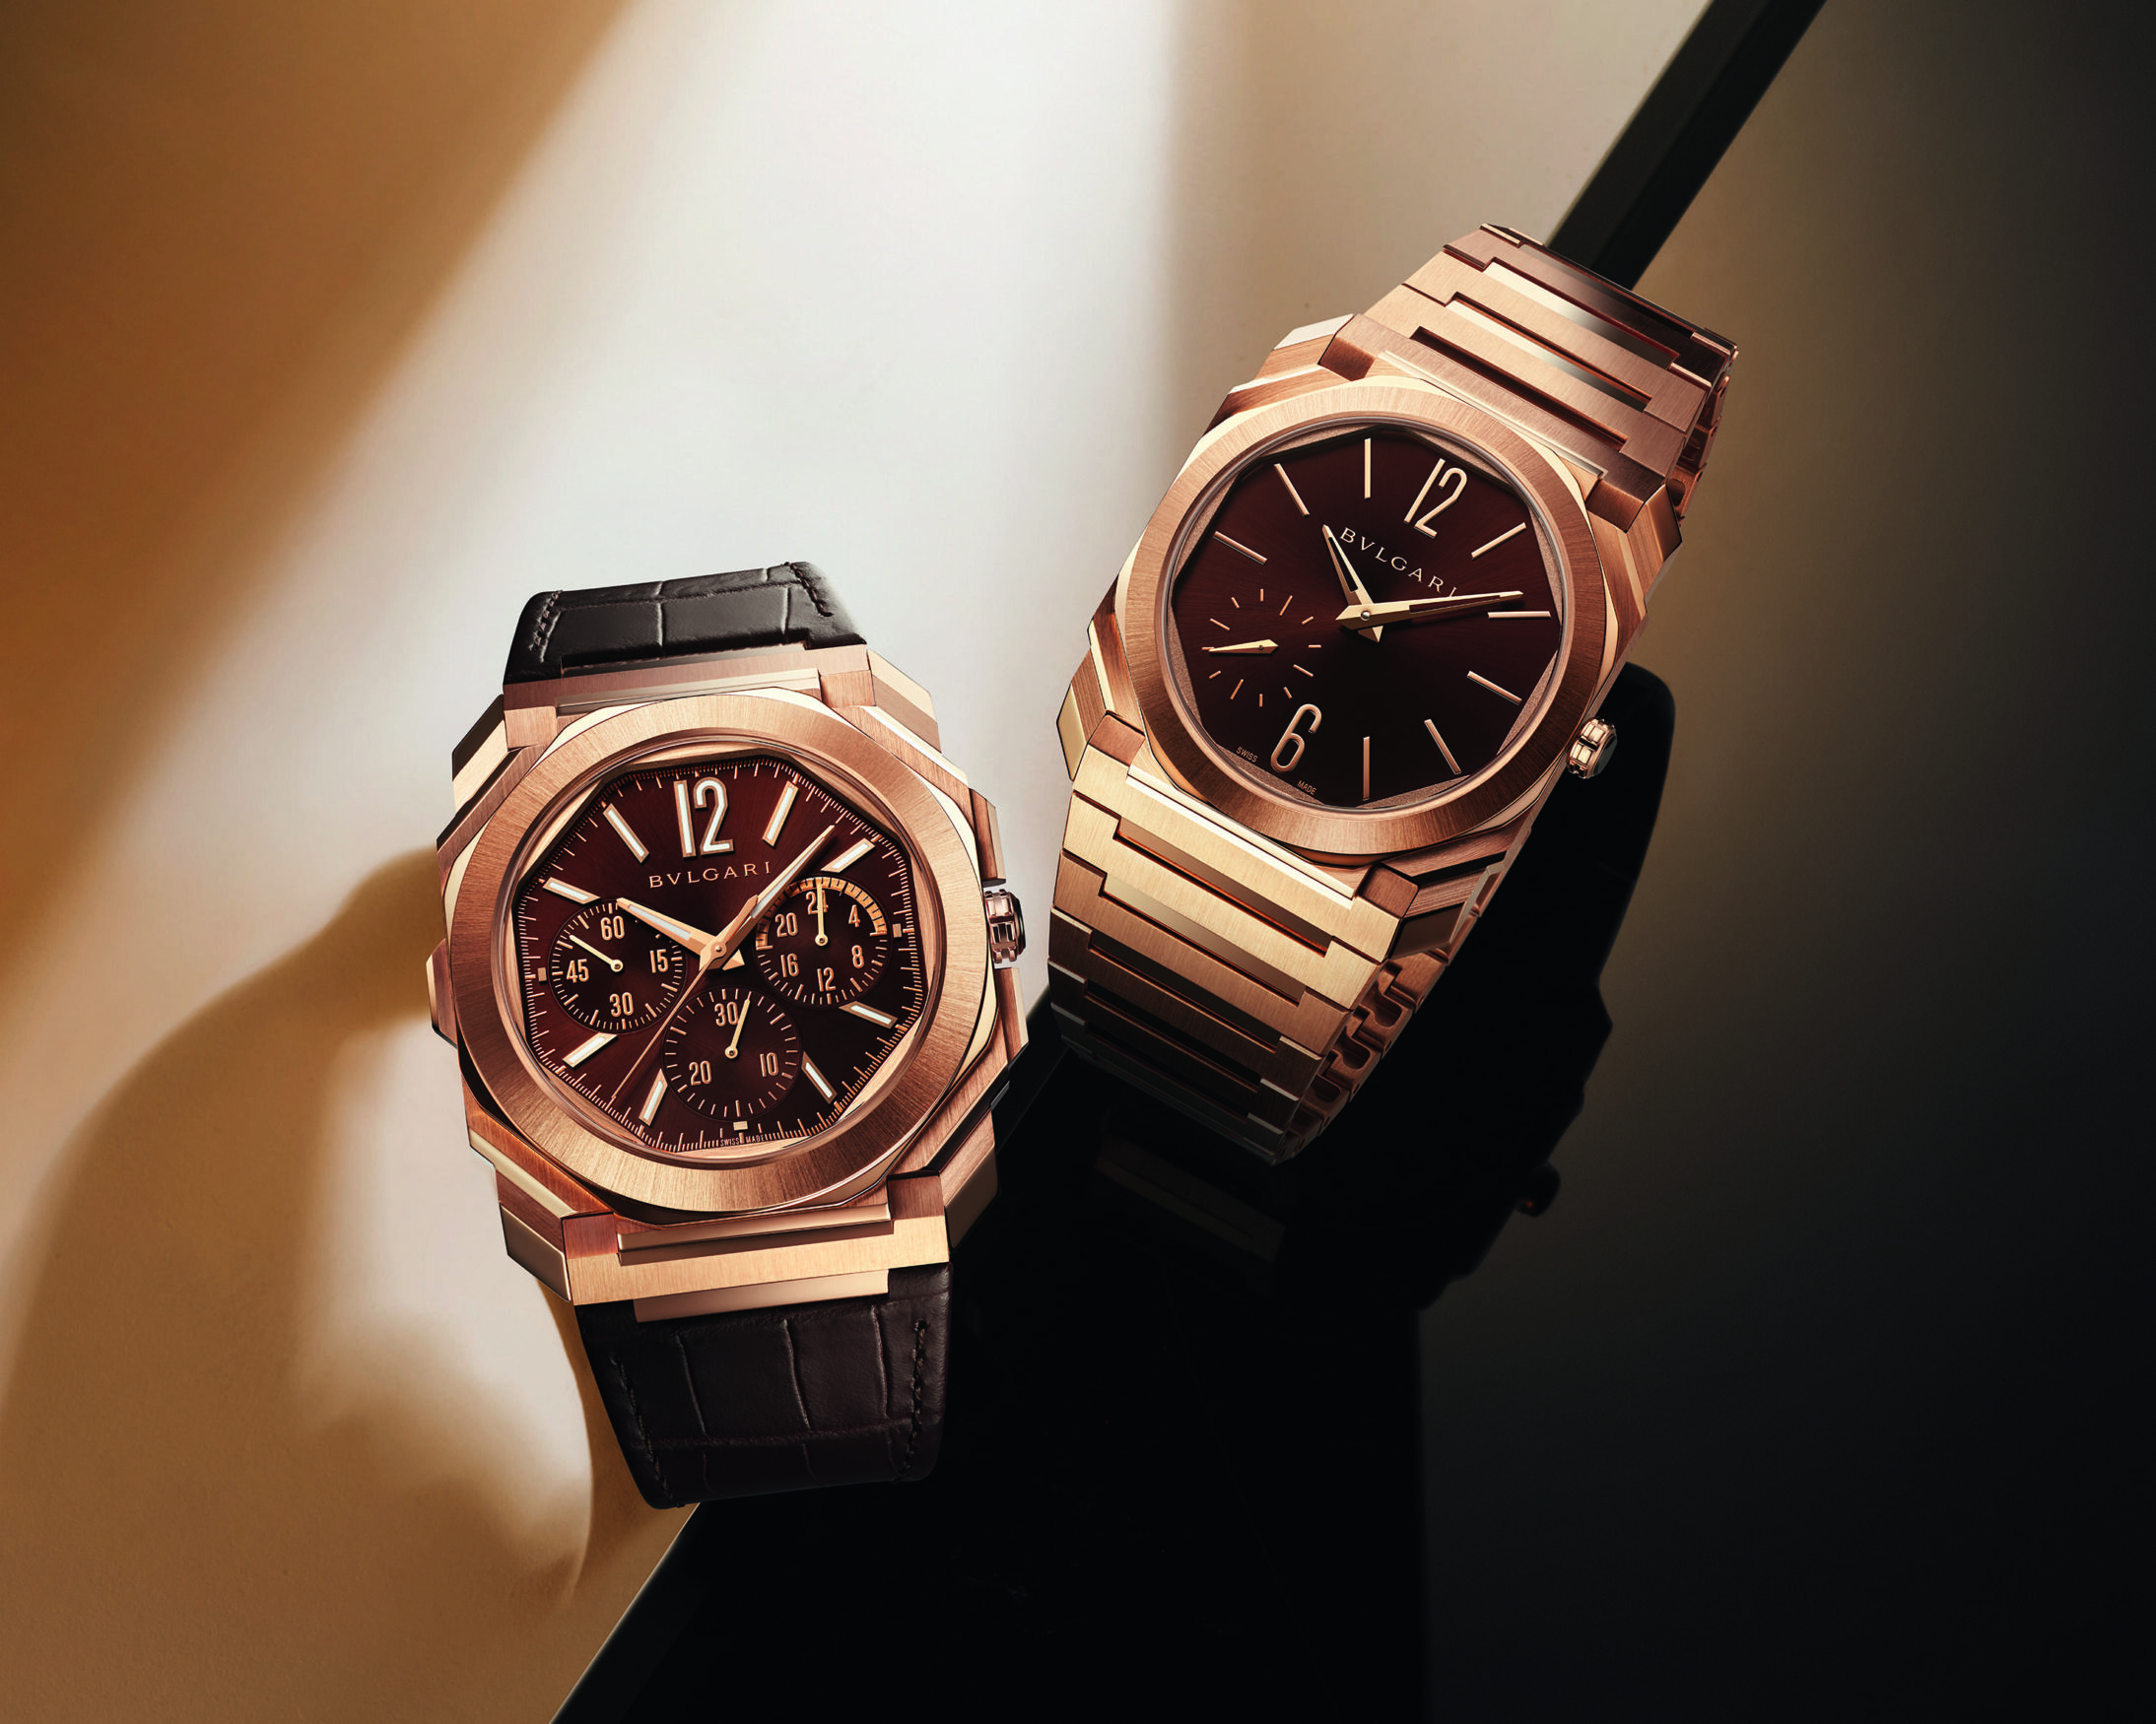 GENEVA WATCH DAYS: The Bulgari novelties find a luxe upgrade for the Octo in gold